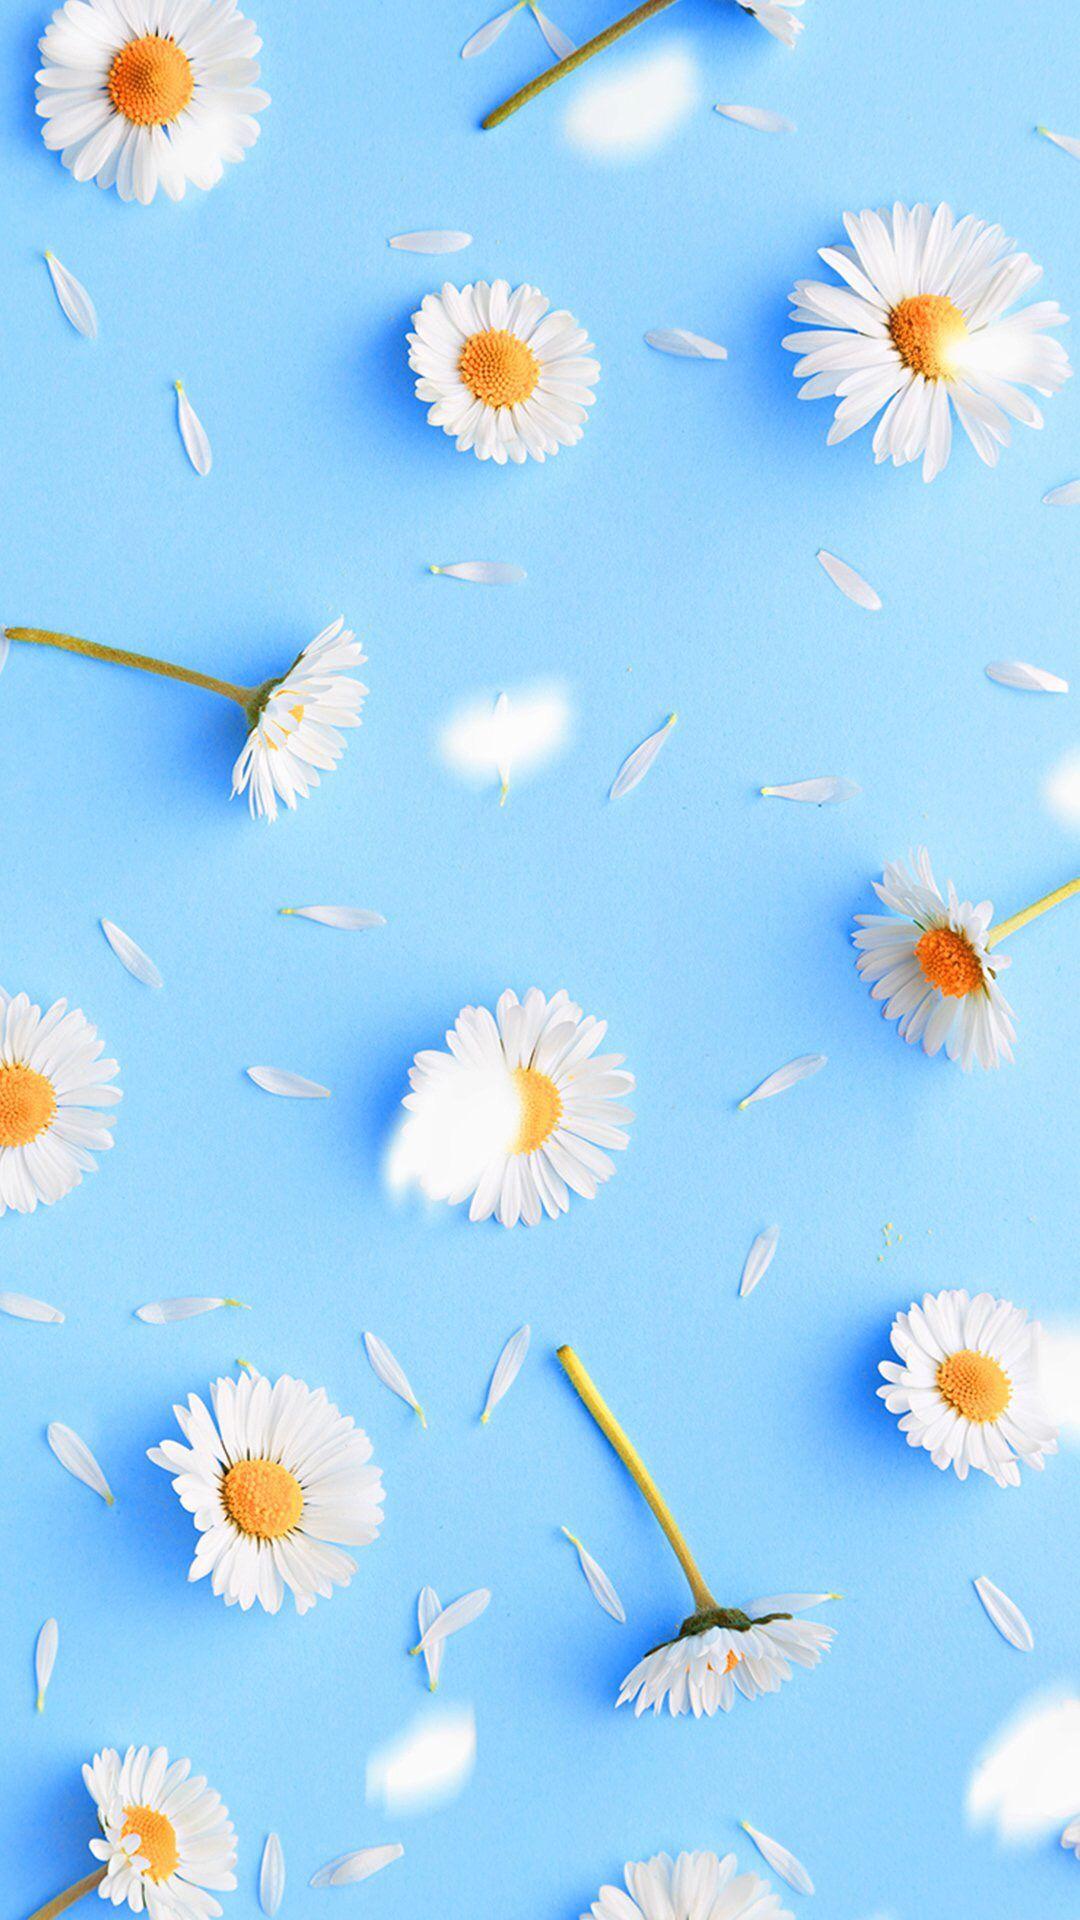 iPhone Wallpaper. Blue, camomile, chamomile, Daisy, Flower, Sky